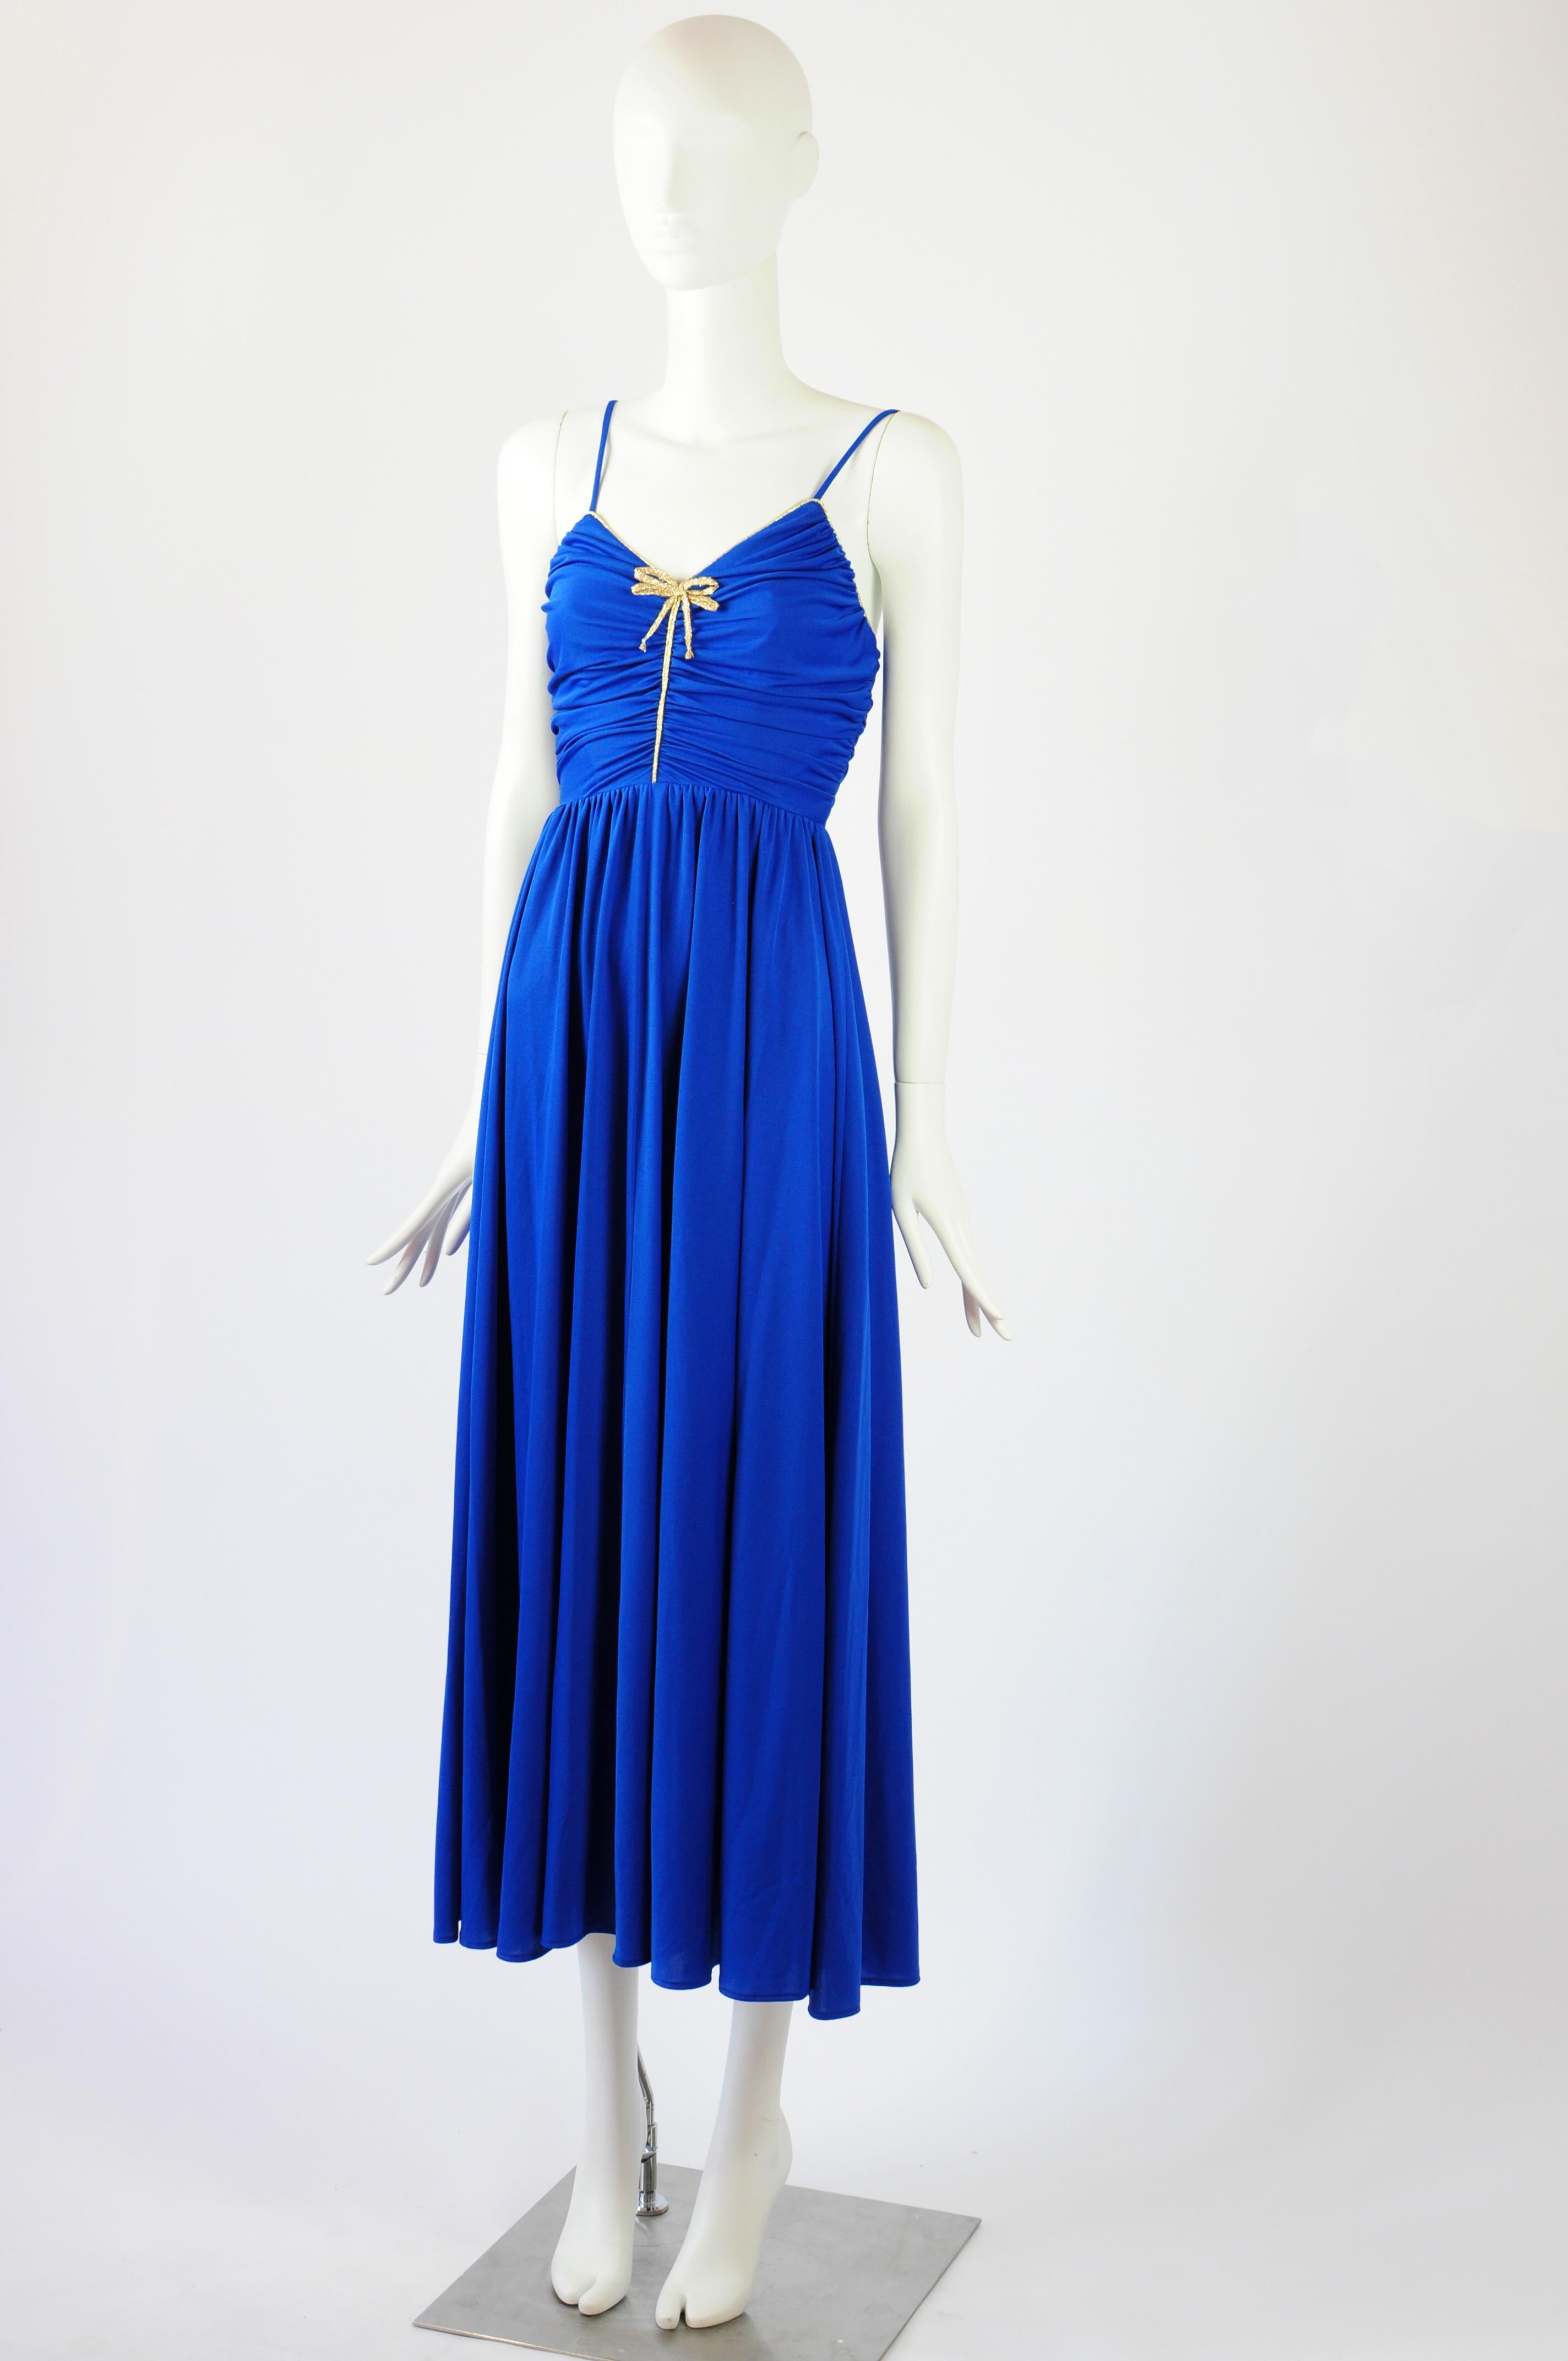 Trina Lewis Marjon Couture Maxi Dress Royal Blue Gold Bow 1970s For Sale 2